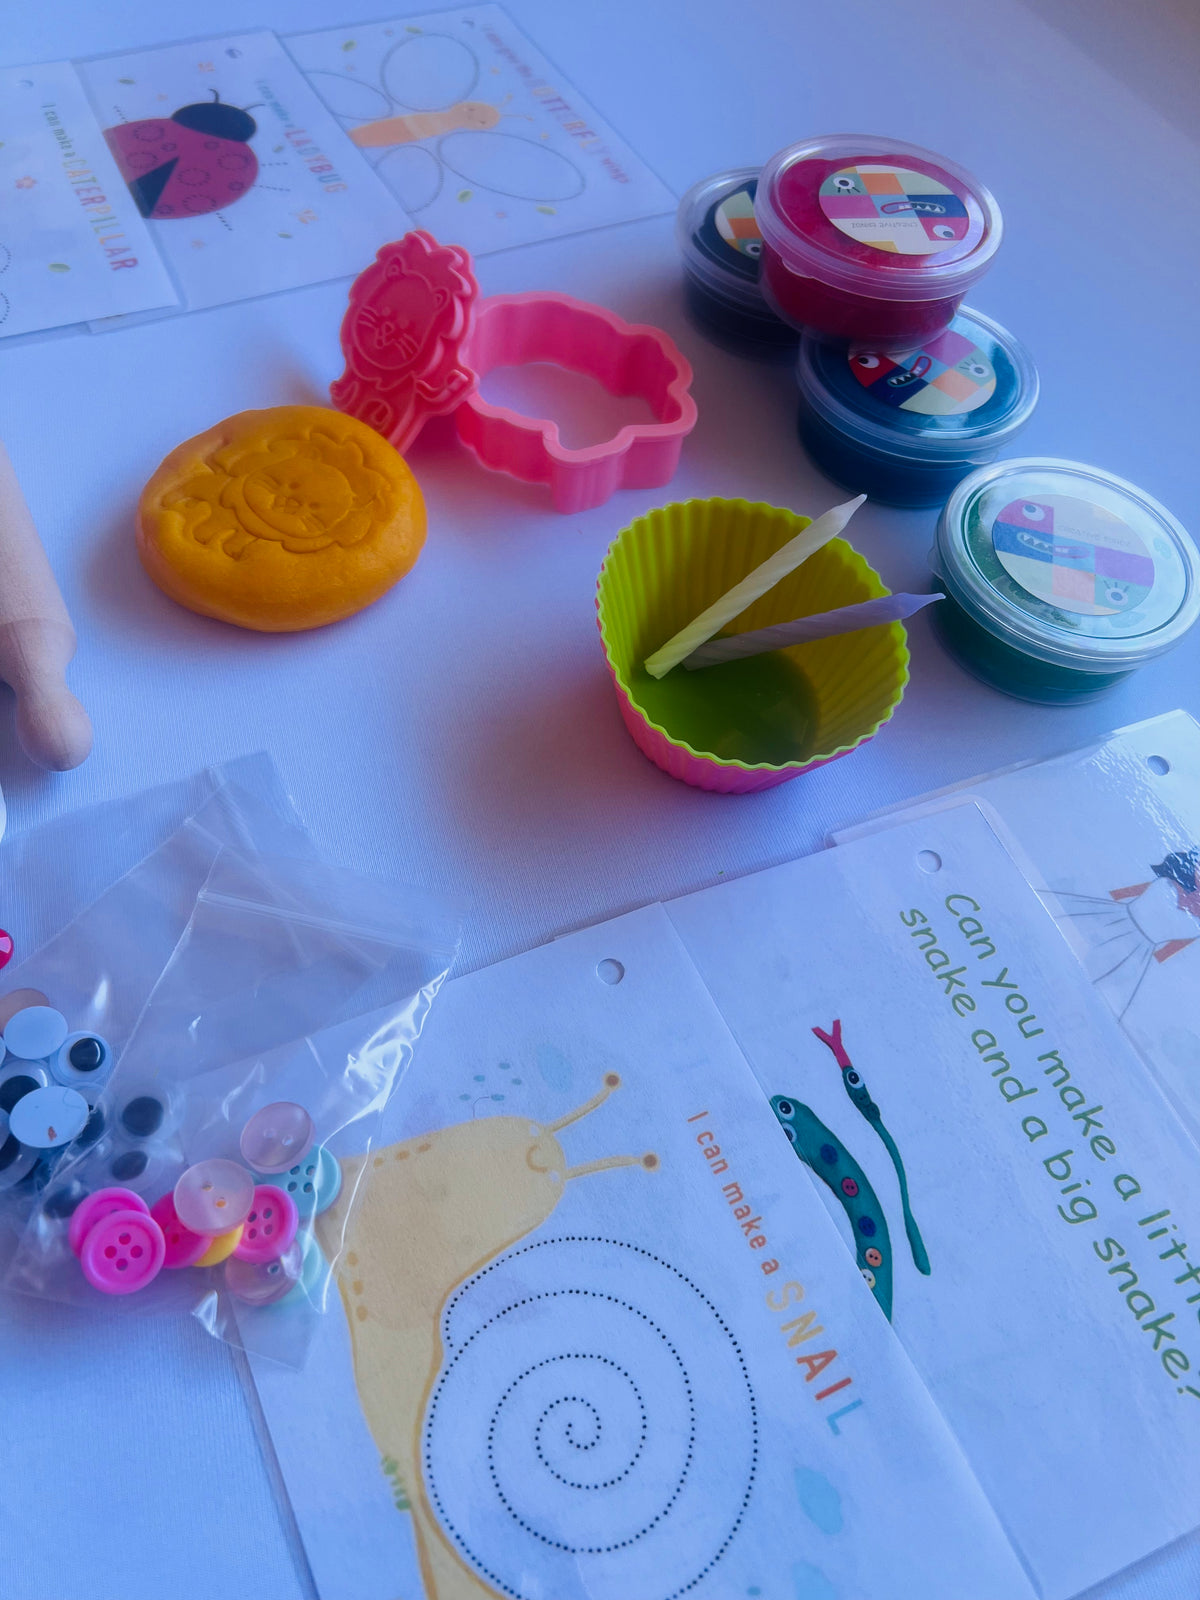 Play dough act Booklet - file download - Creative mindz - busy bags for busy kids 